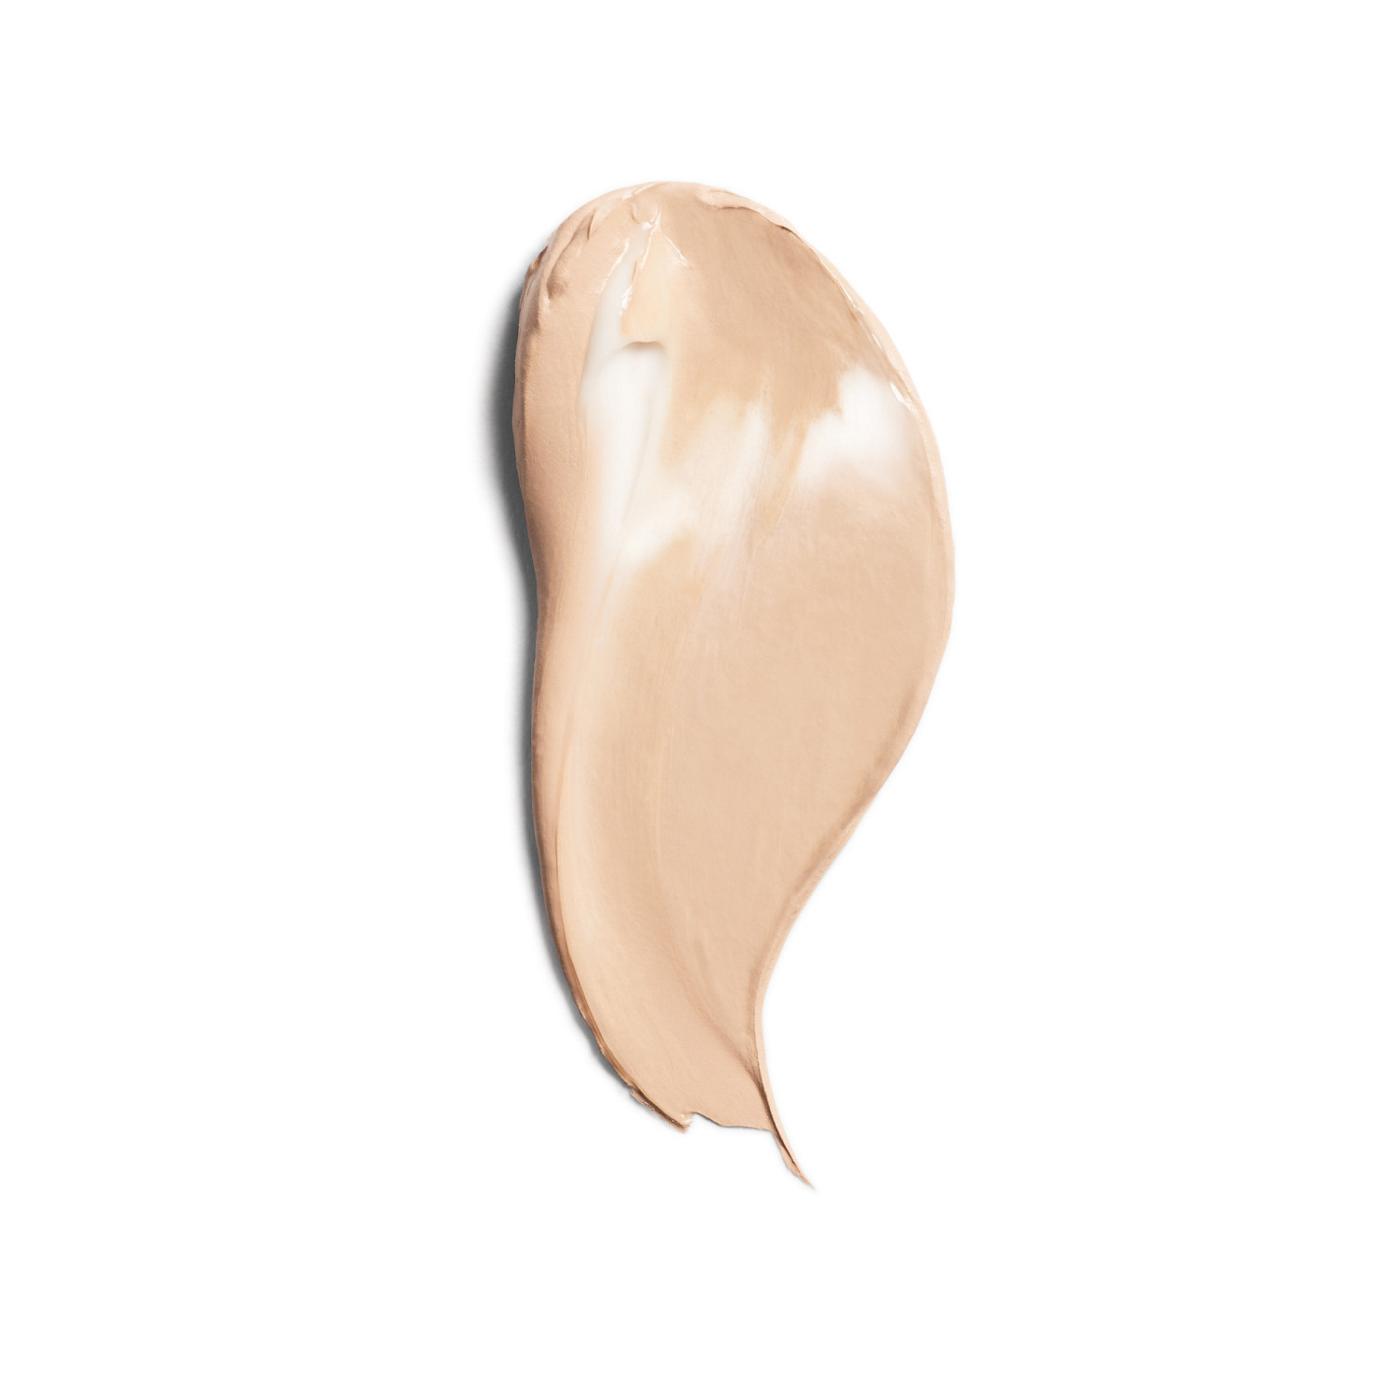 Covergirl Simply Ageless Wrinkle Defying Foundation 220 Creamy Natural; image 6 of 8